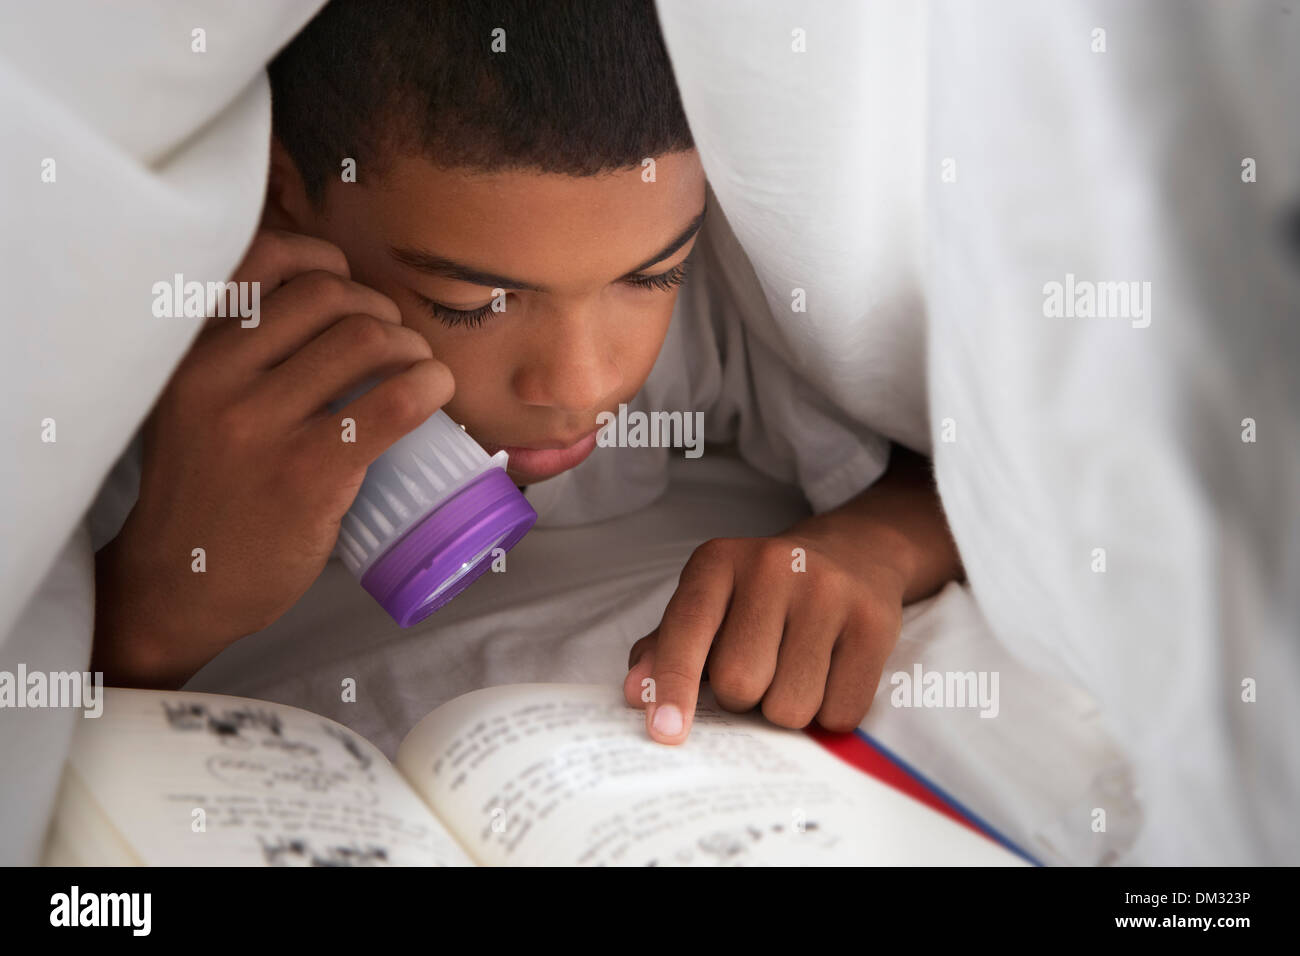 Boy Reading Book With Torch Under Duvet Stock Photo